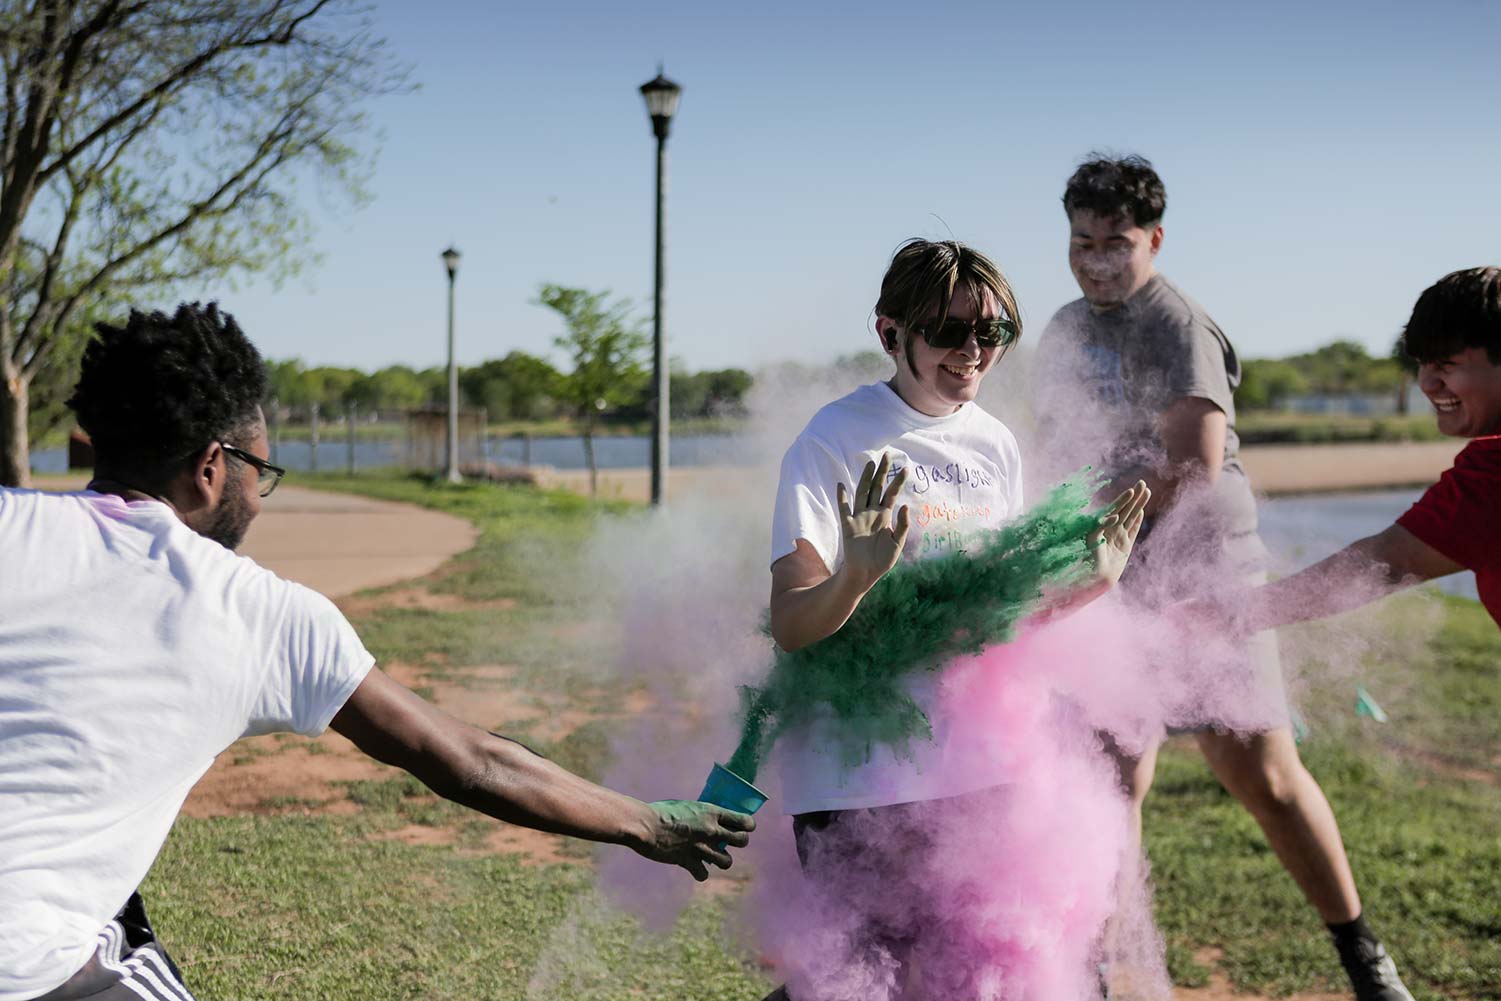 A student runs through a dust cloud after hitting a checkpoint, April 12. Runners were allowed to customize their shirts before the run to add to the color spots left by the dust.